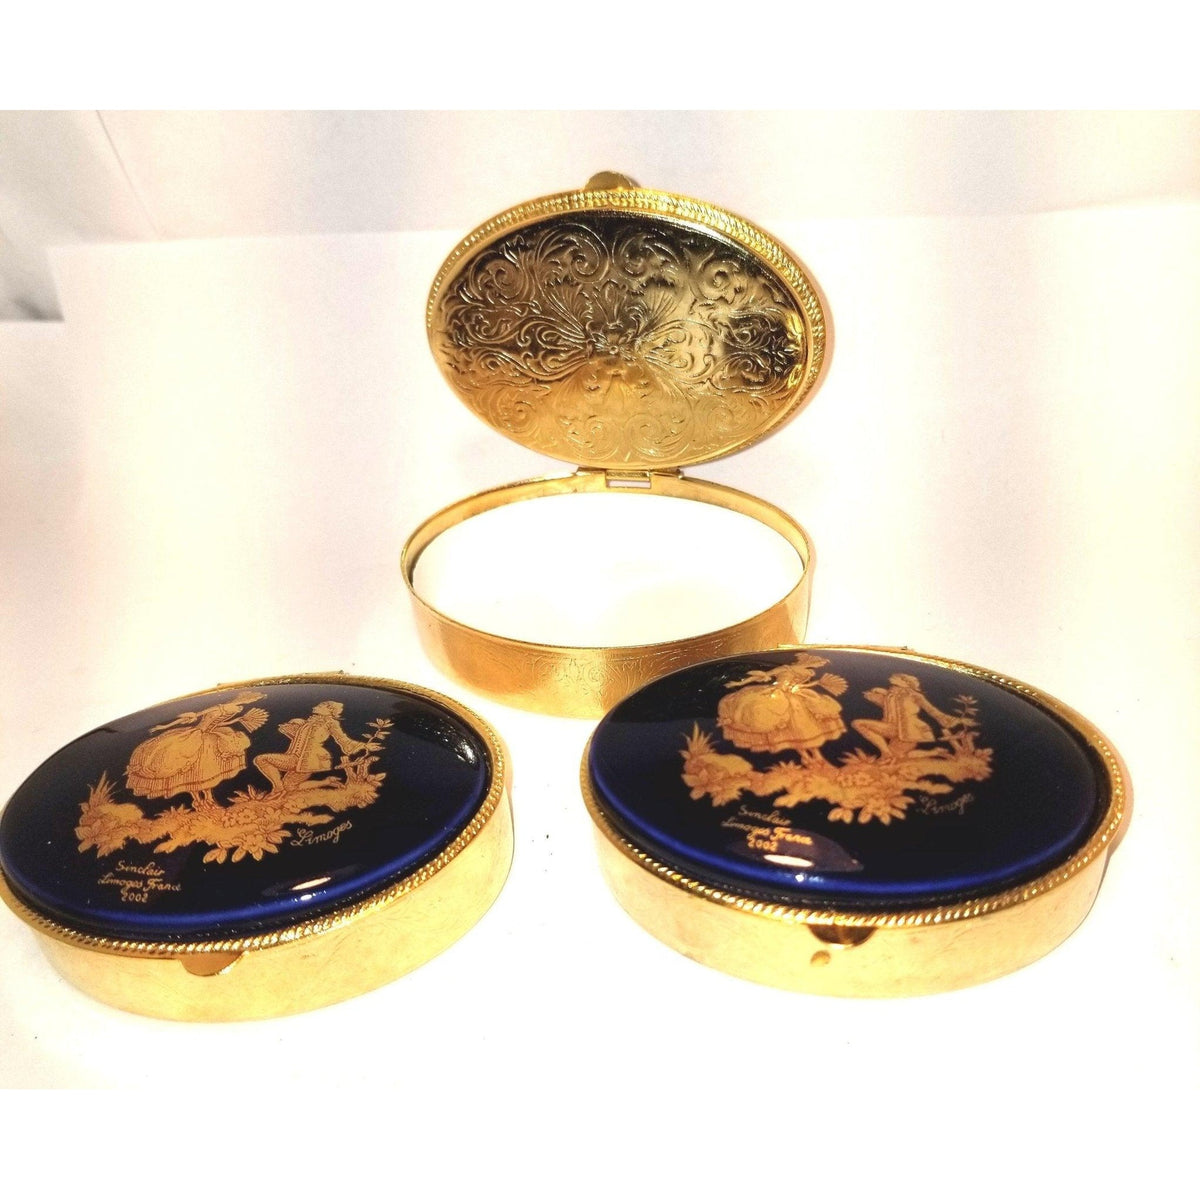 Lopsided Cobalt Blue round brass box (SITTING LOPSIDED - look close at picture) Gold Lovers Limoges Box Figurine - Limoges Box Boutique